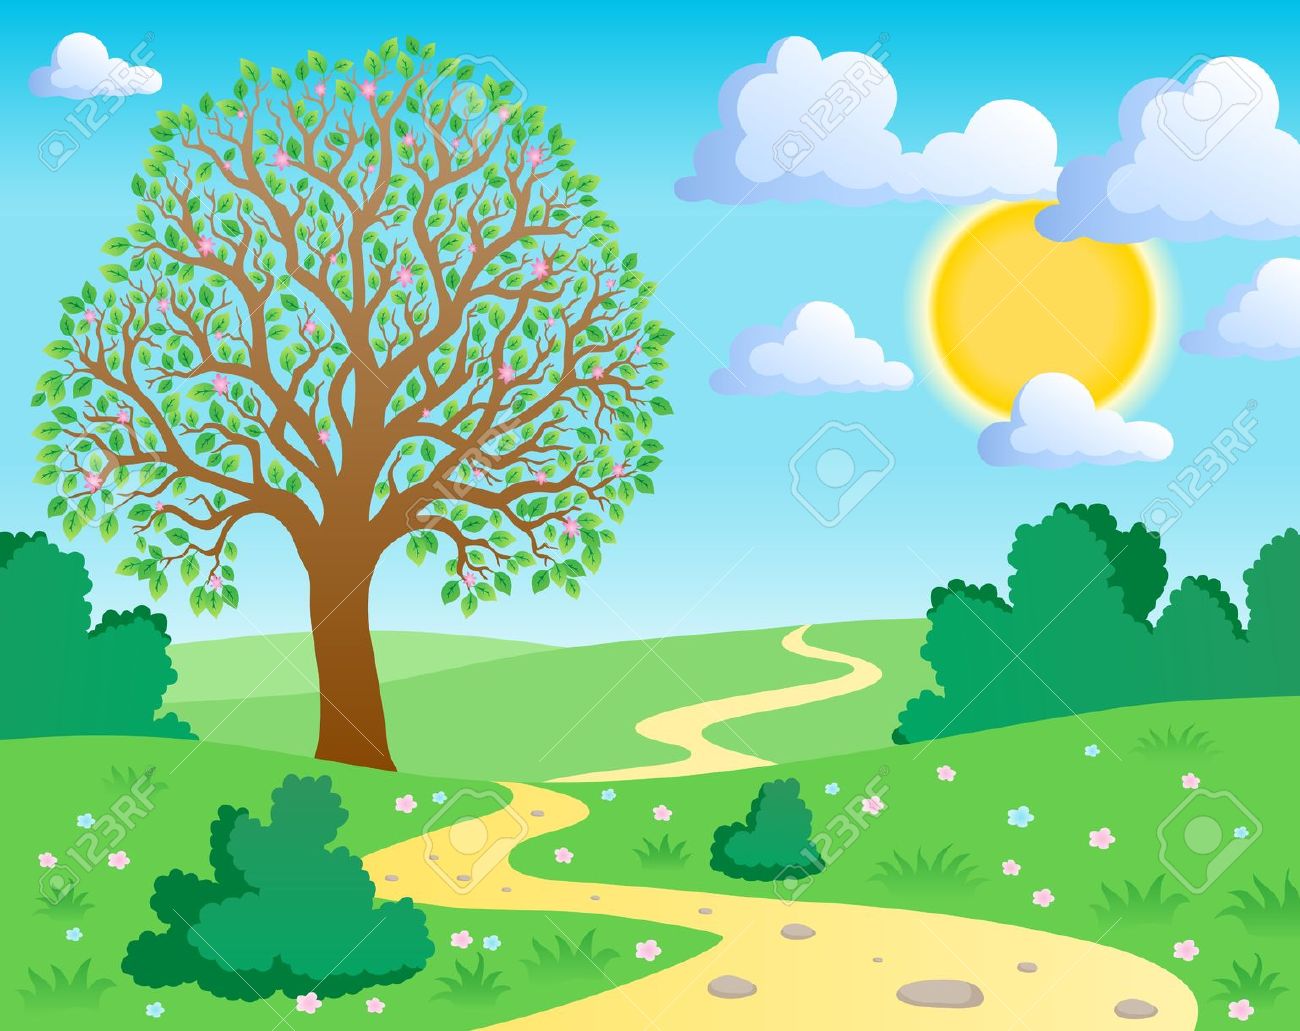 natural scenery clipart - Clipground